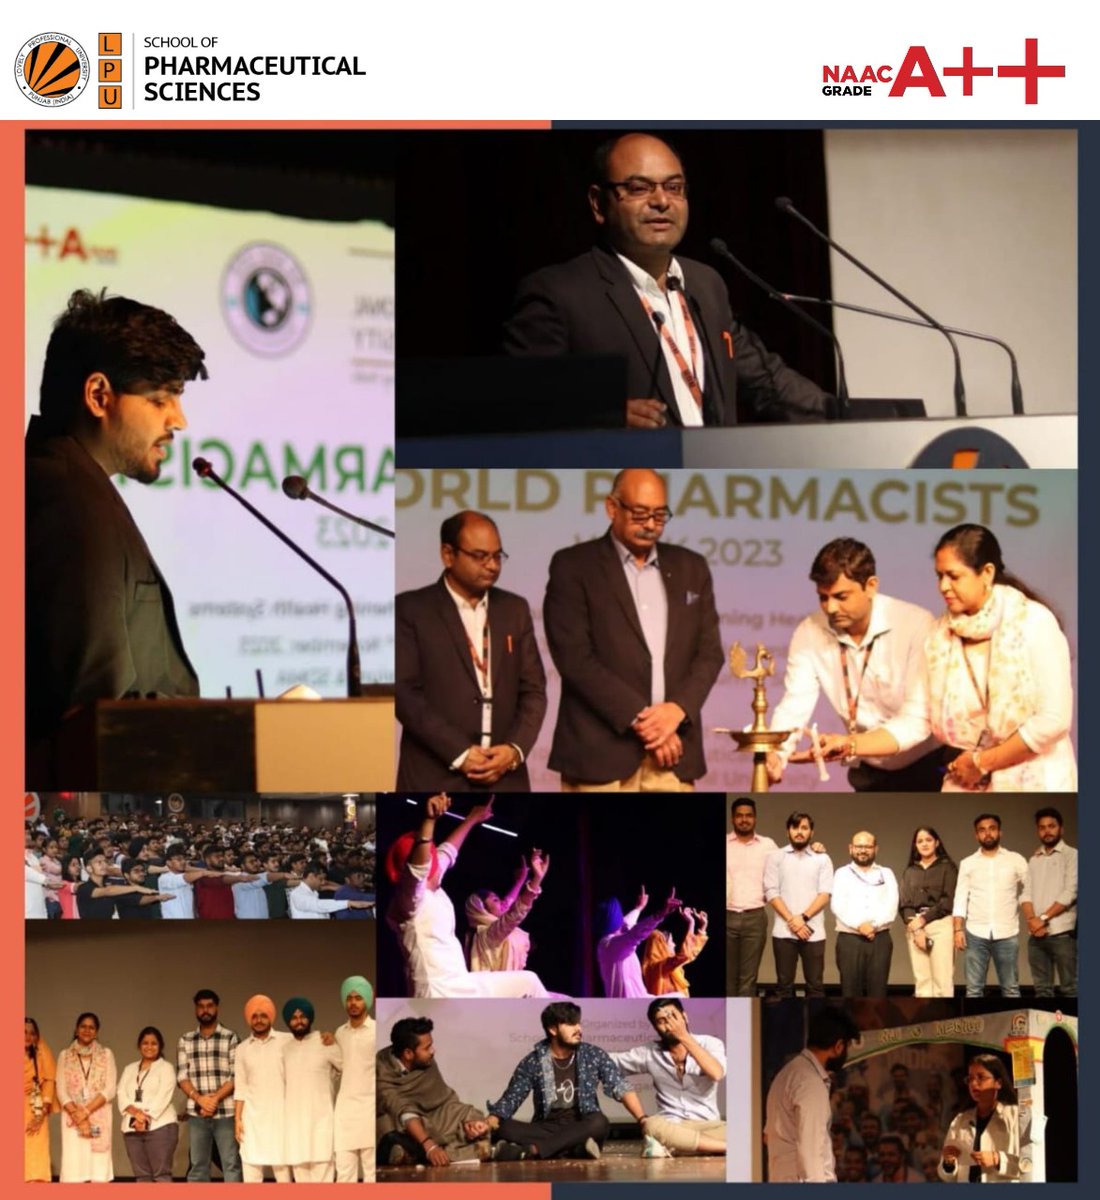 School of Pharmaceutical Sciences, LPU is pleased to share few glimpses from the World Pharmacists week celebration 2023. #pharmacyheroes #pharmacy #worldpharmacistsday23 #lpuuniversity #lpuachievements #proudmoment #lpupharmacy #research #science #success#school #team #education